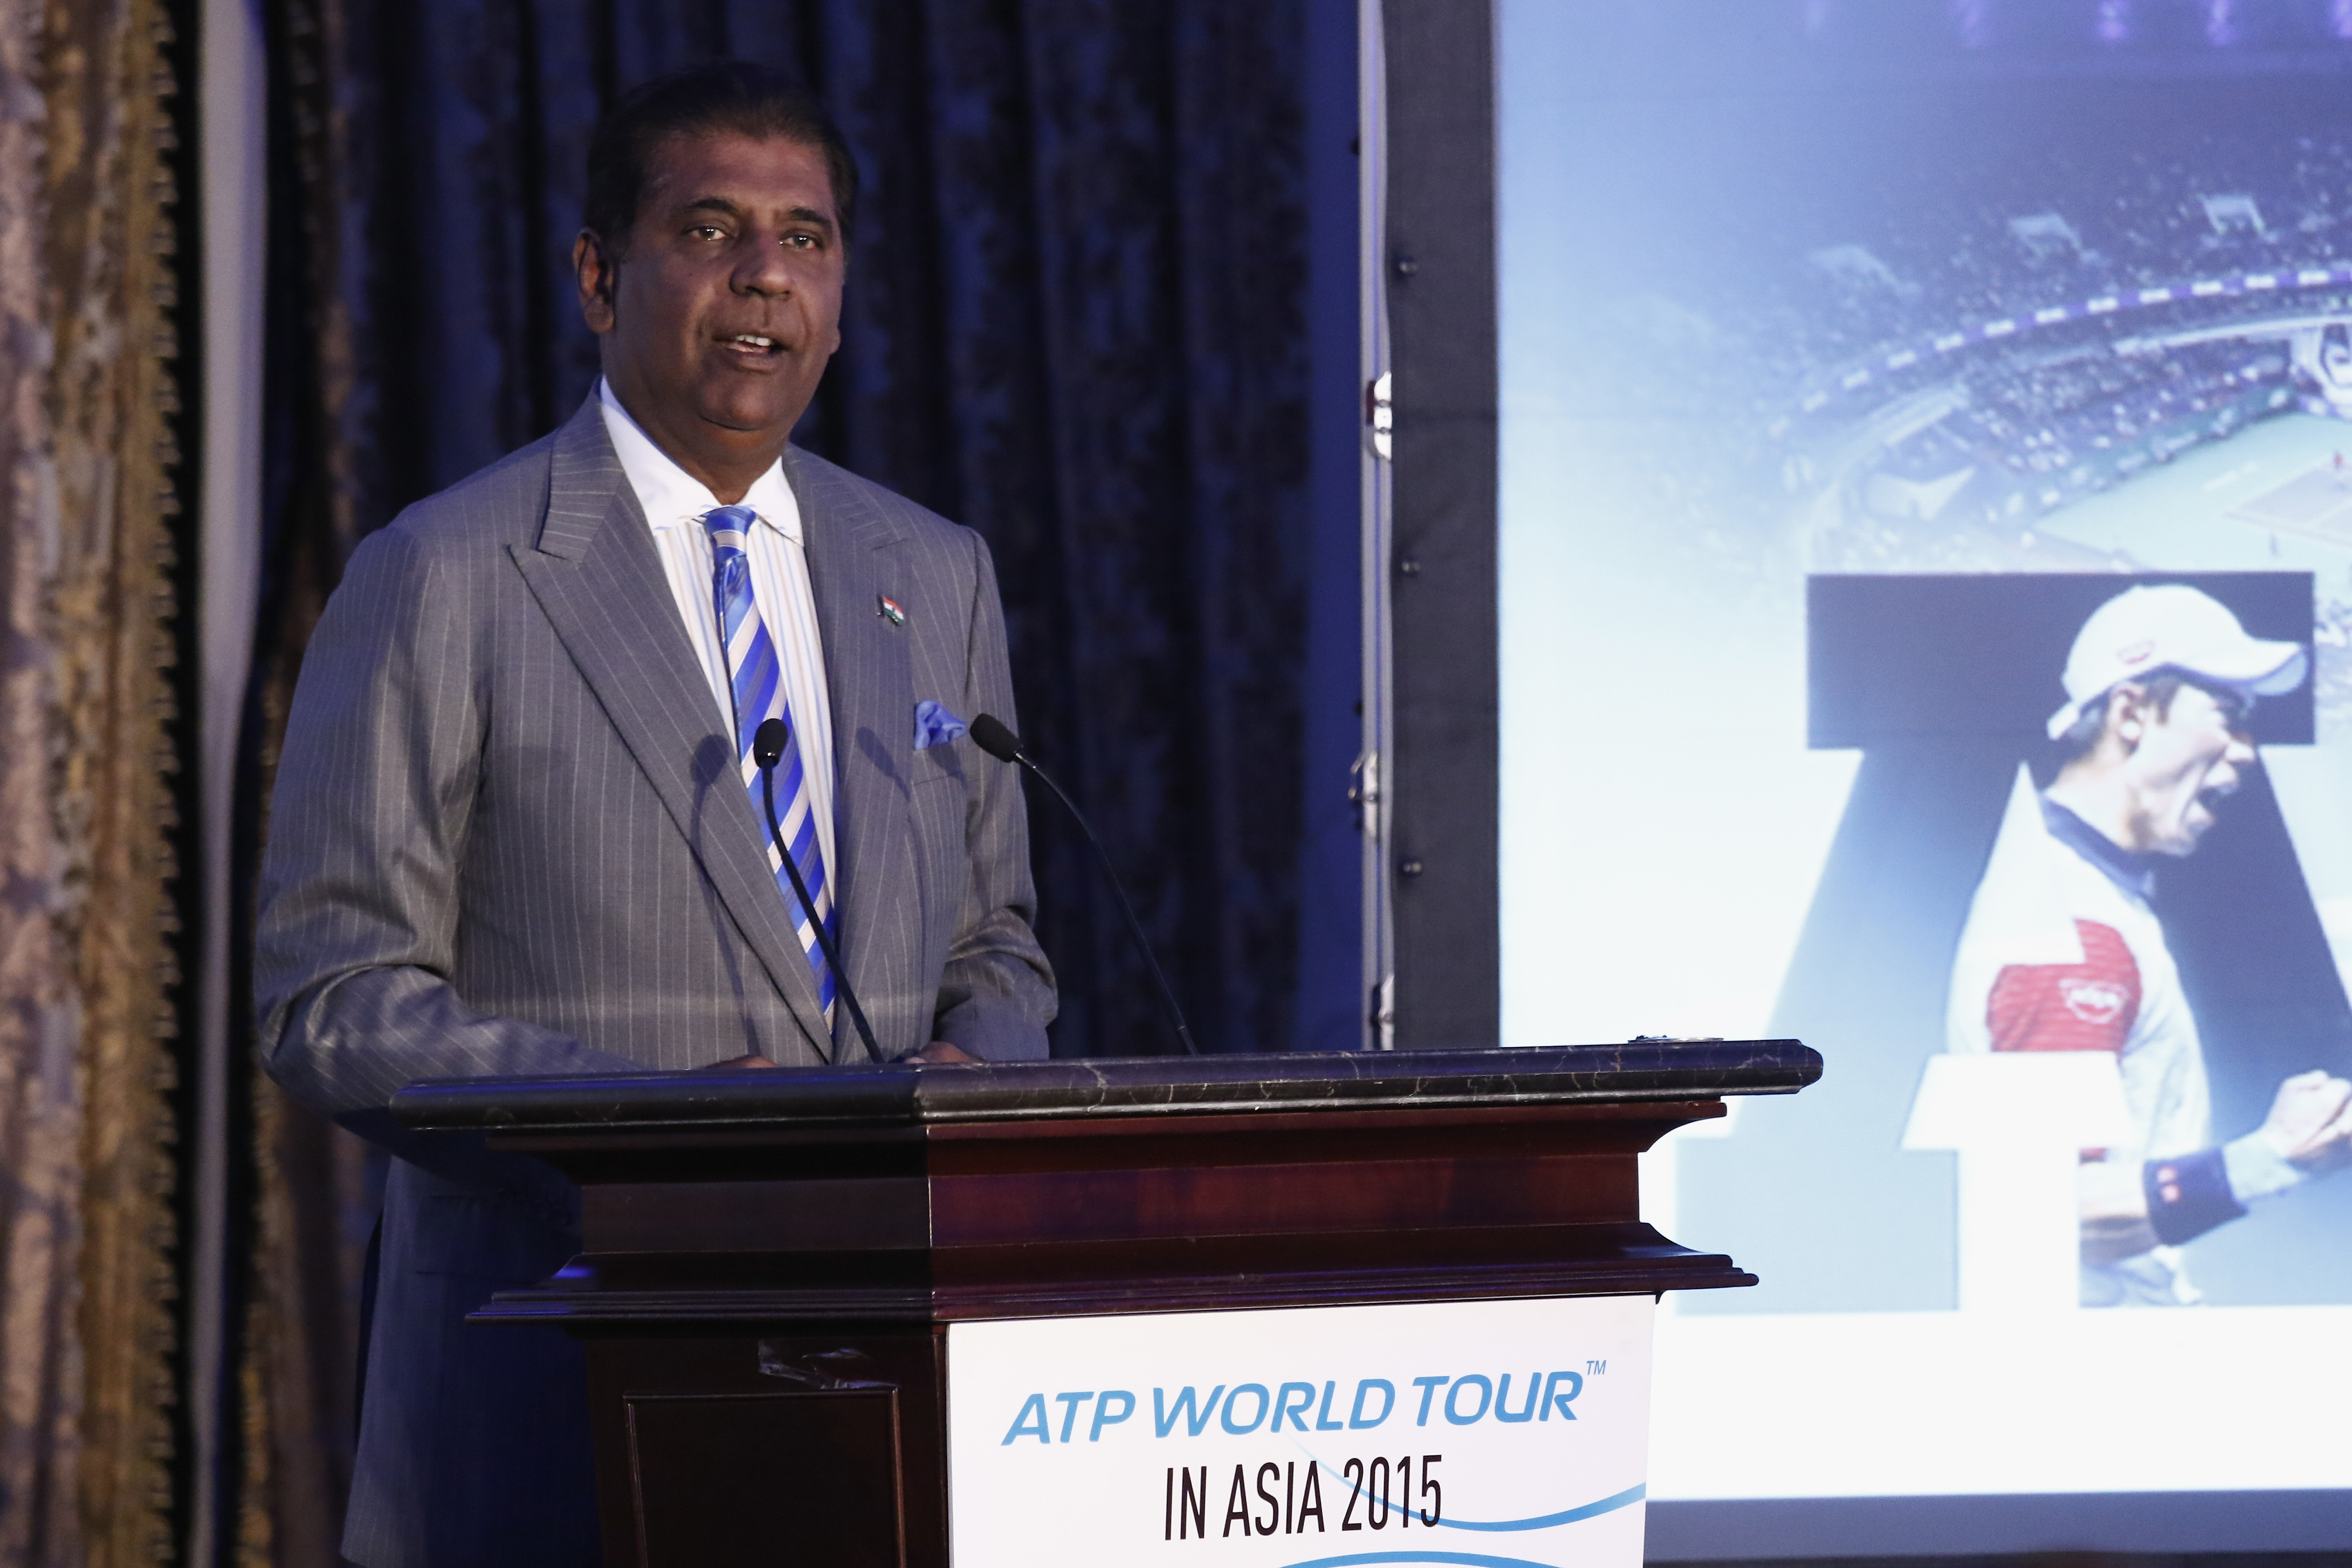 Indian tennis doesn’t lack guidance, you play the hand you're dealt with, says Vijay Amritraj